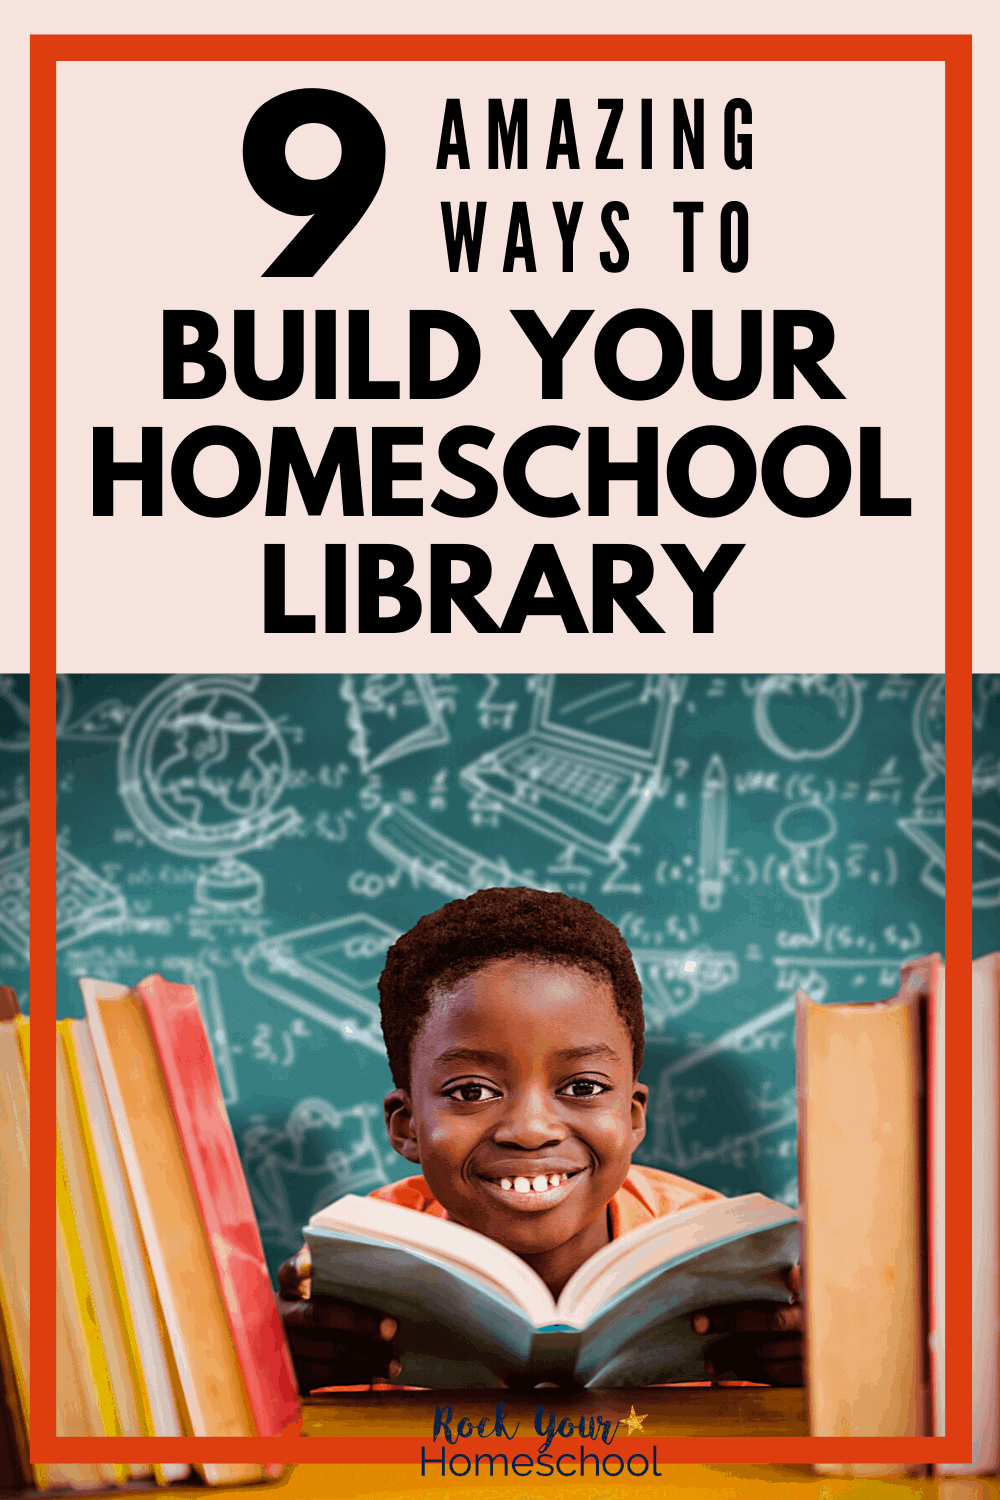 9 Amazing Ways to Build Your Homeschool Library